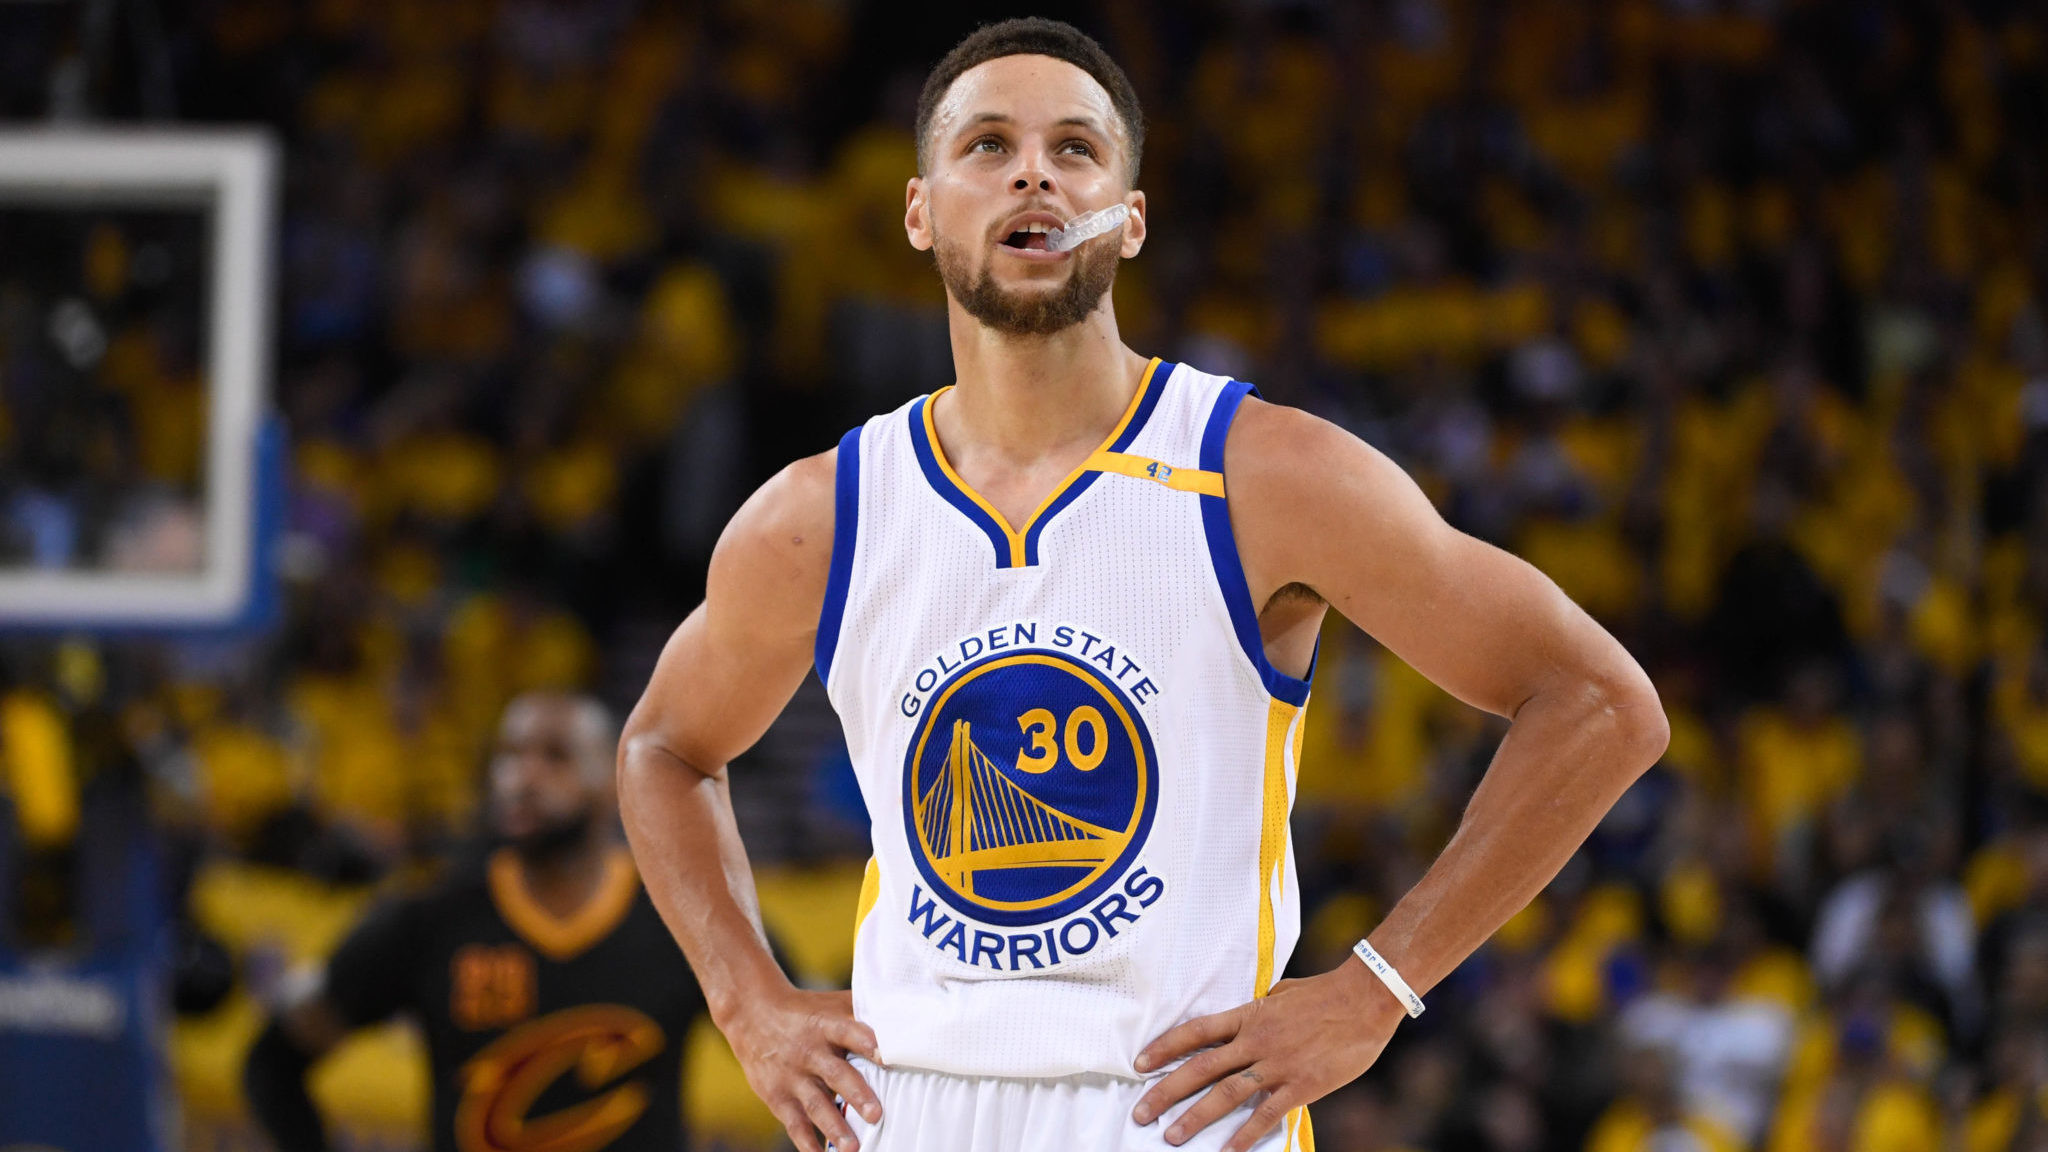 steph curry live wallpapers,sports,basketball player,team sport,player,ball game